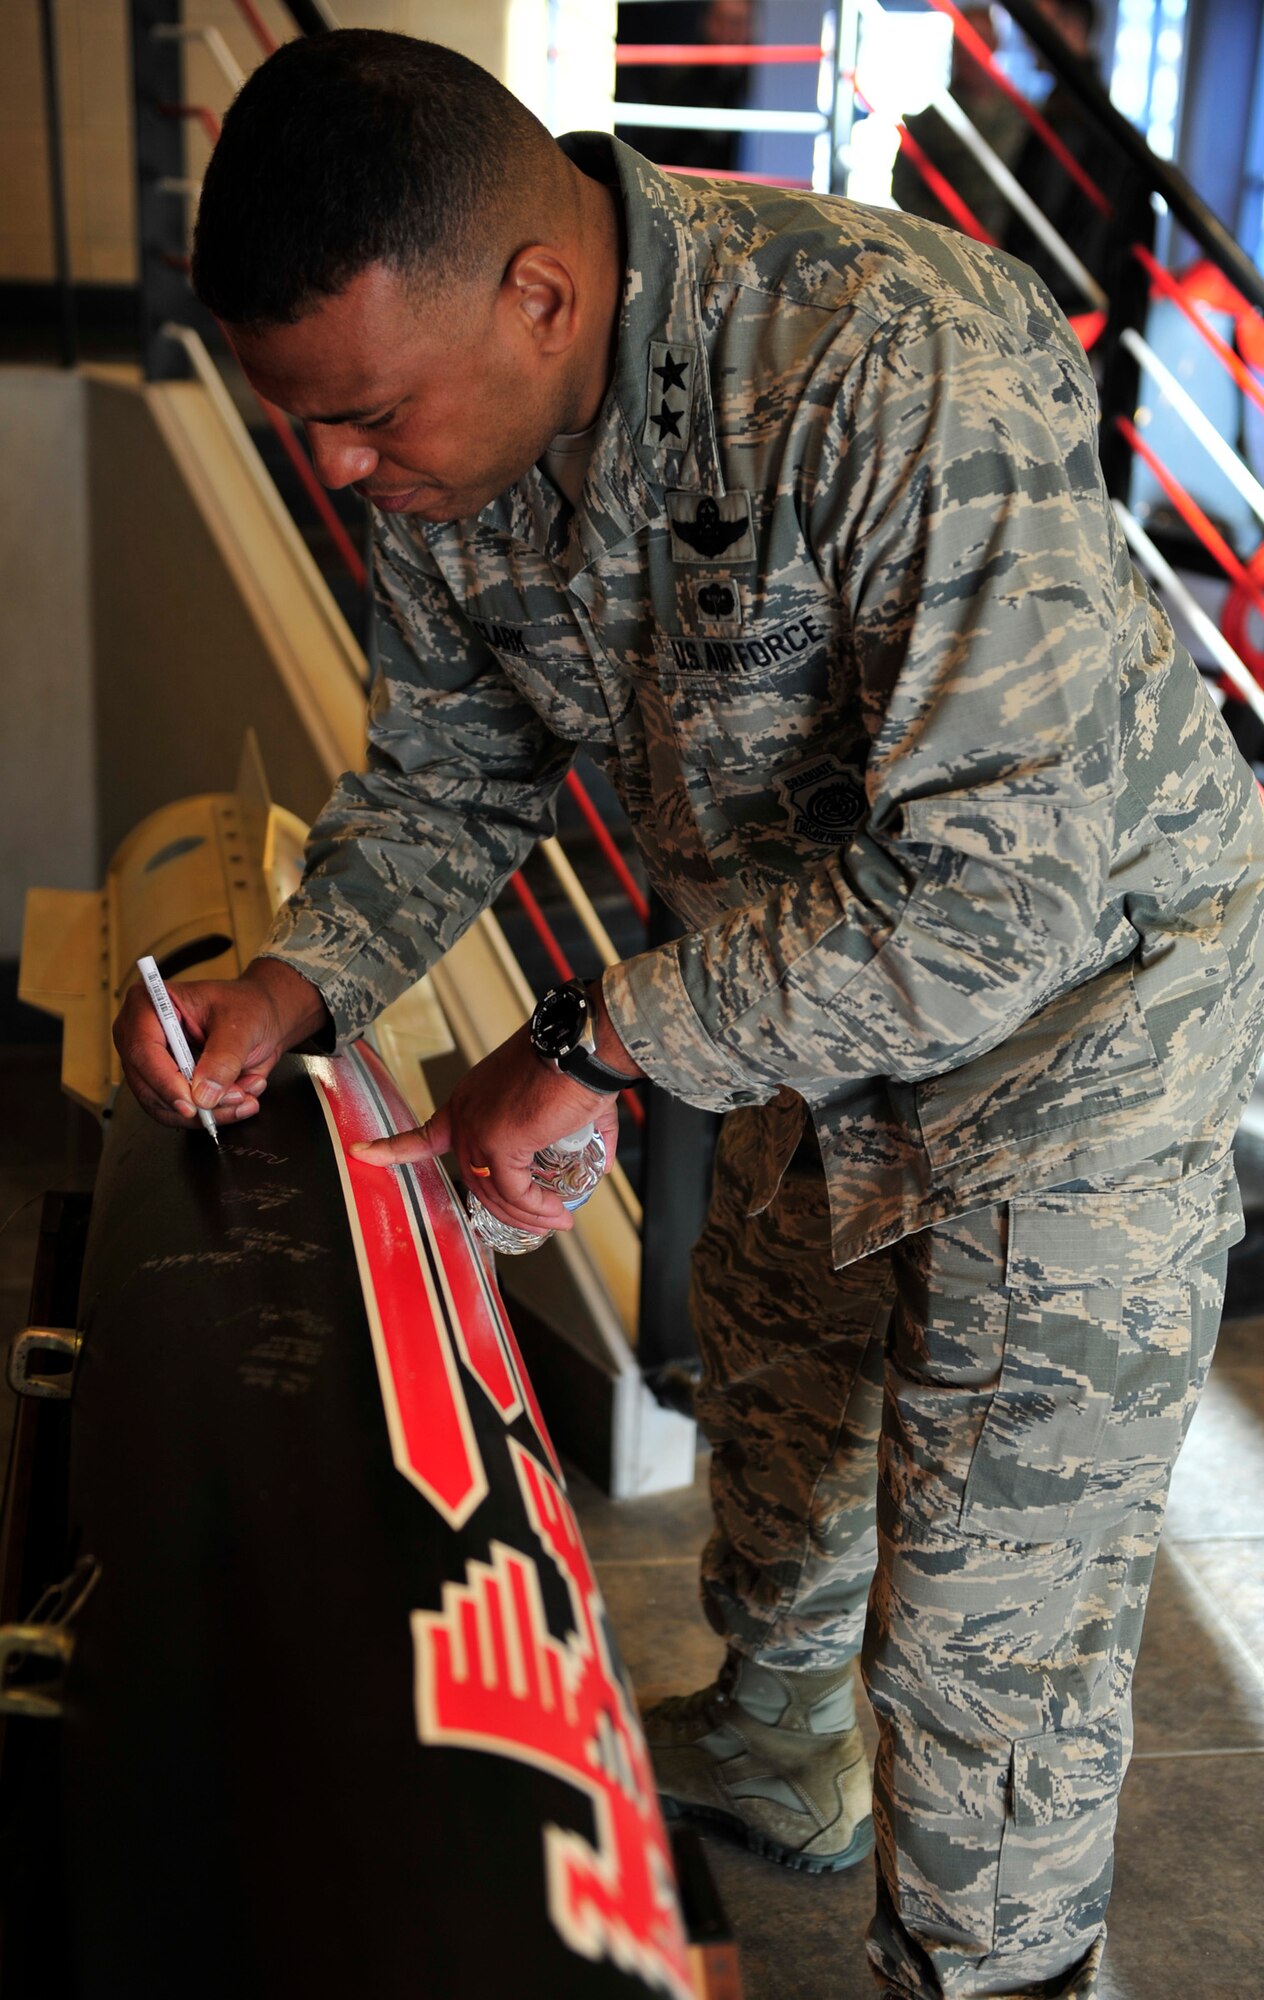 Maj. Gen. Richard Clark, Eighth Air Force commander, signs an inert MK-62 500-pound Quick Strike Mine at Ellsworth Air Force Base, S.D., Jan. 19, 2016. The general signed the munition after receiving a tour of the 34th Bomb Squadron, which has been renovated since his last time at Ellsworth. (U.S. Air Force photo by Airman 1st Class James L. Miller/Released)